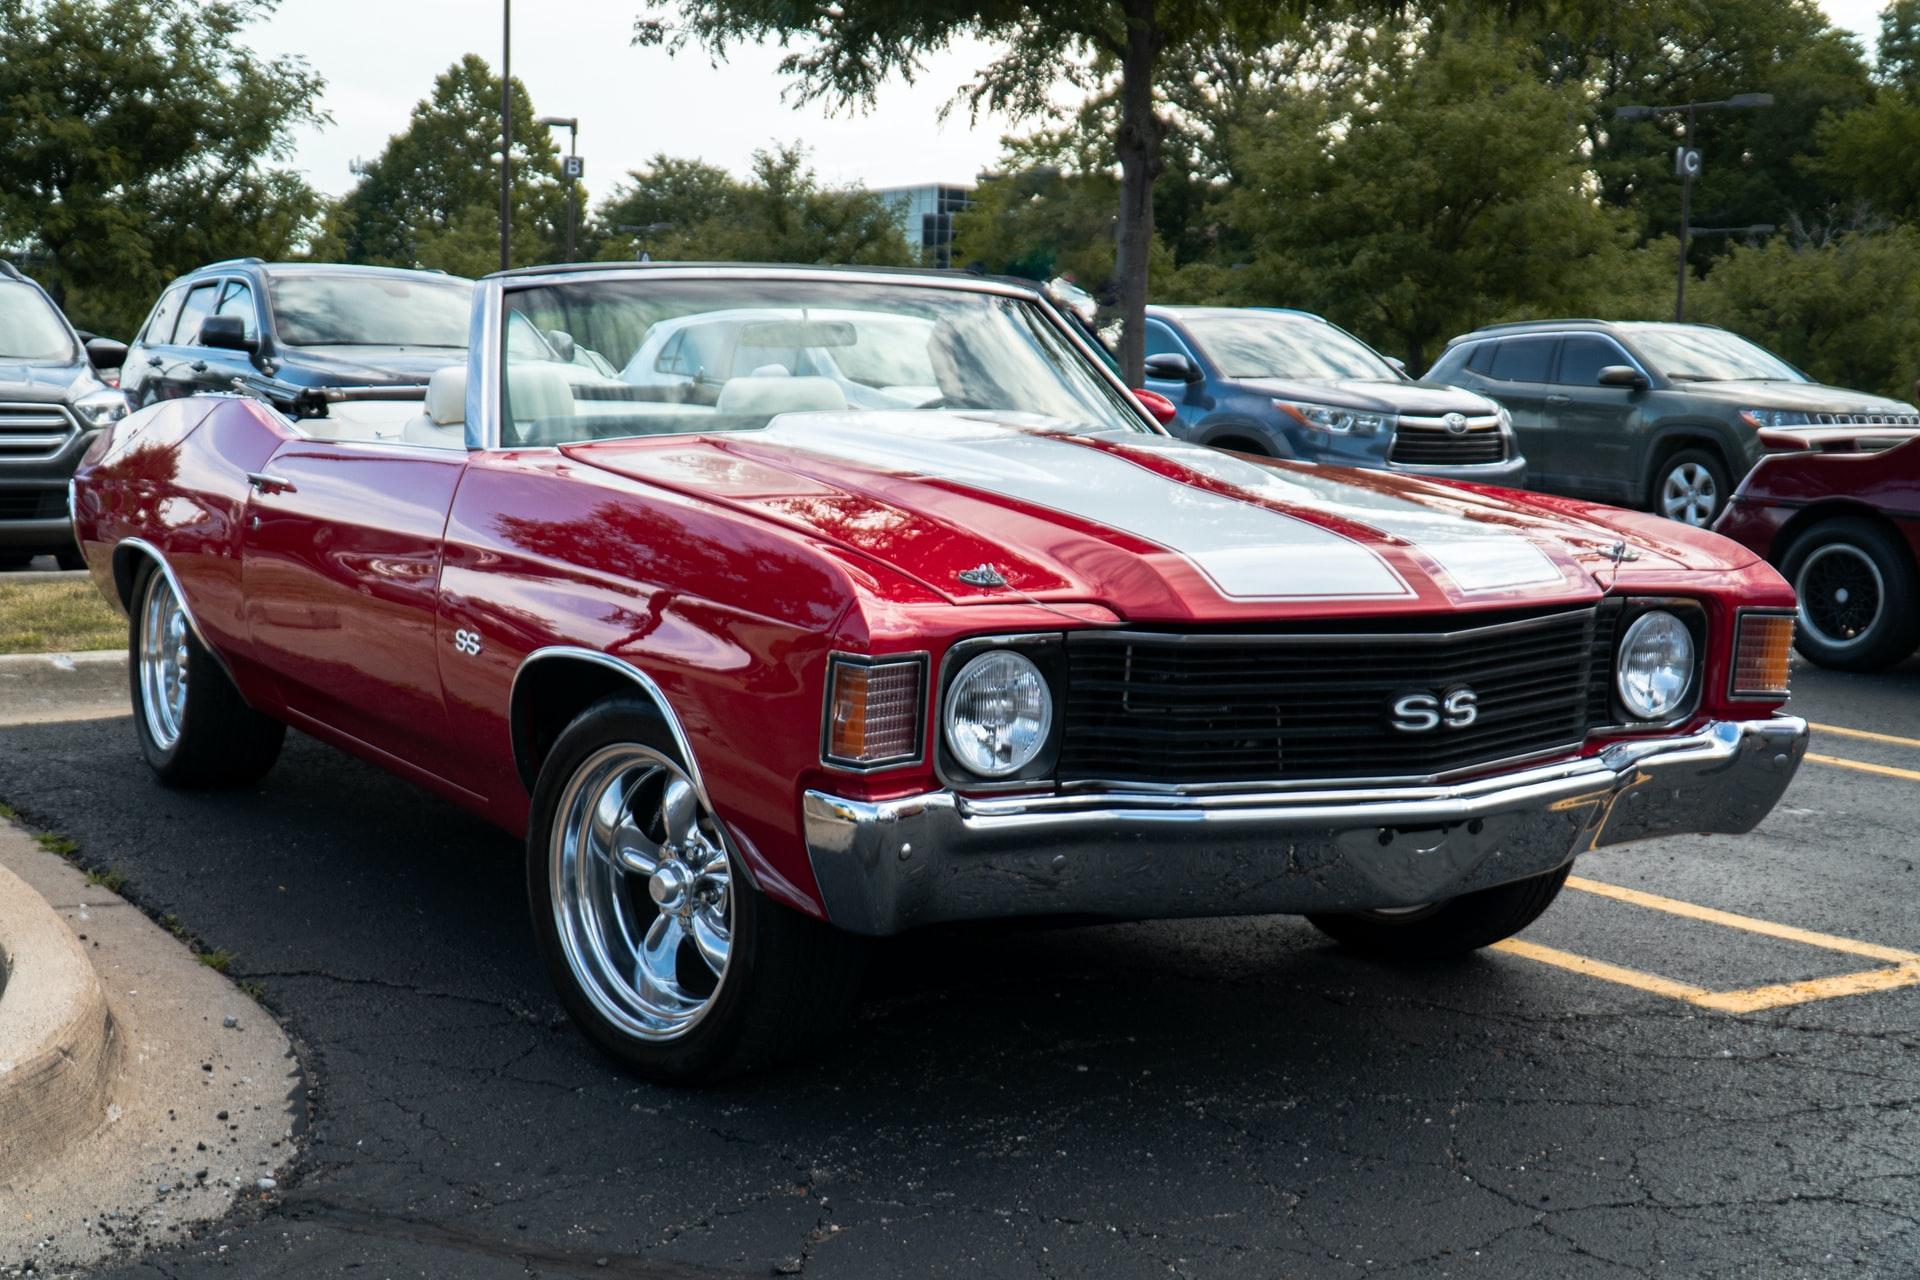 If you love American classics, then you’ll surely recognize these cars.